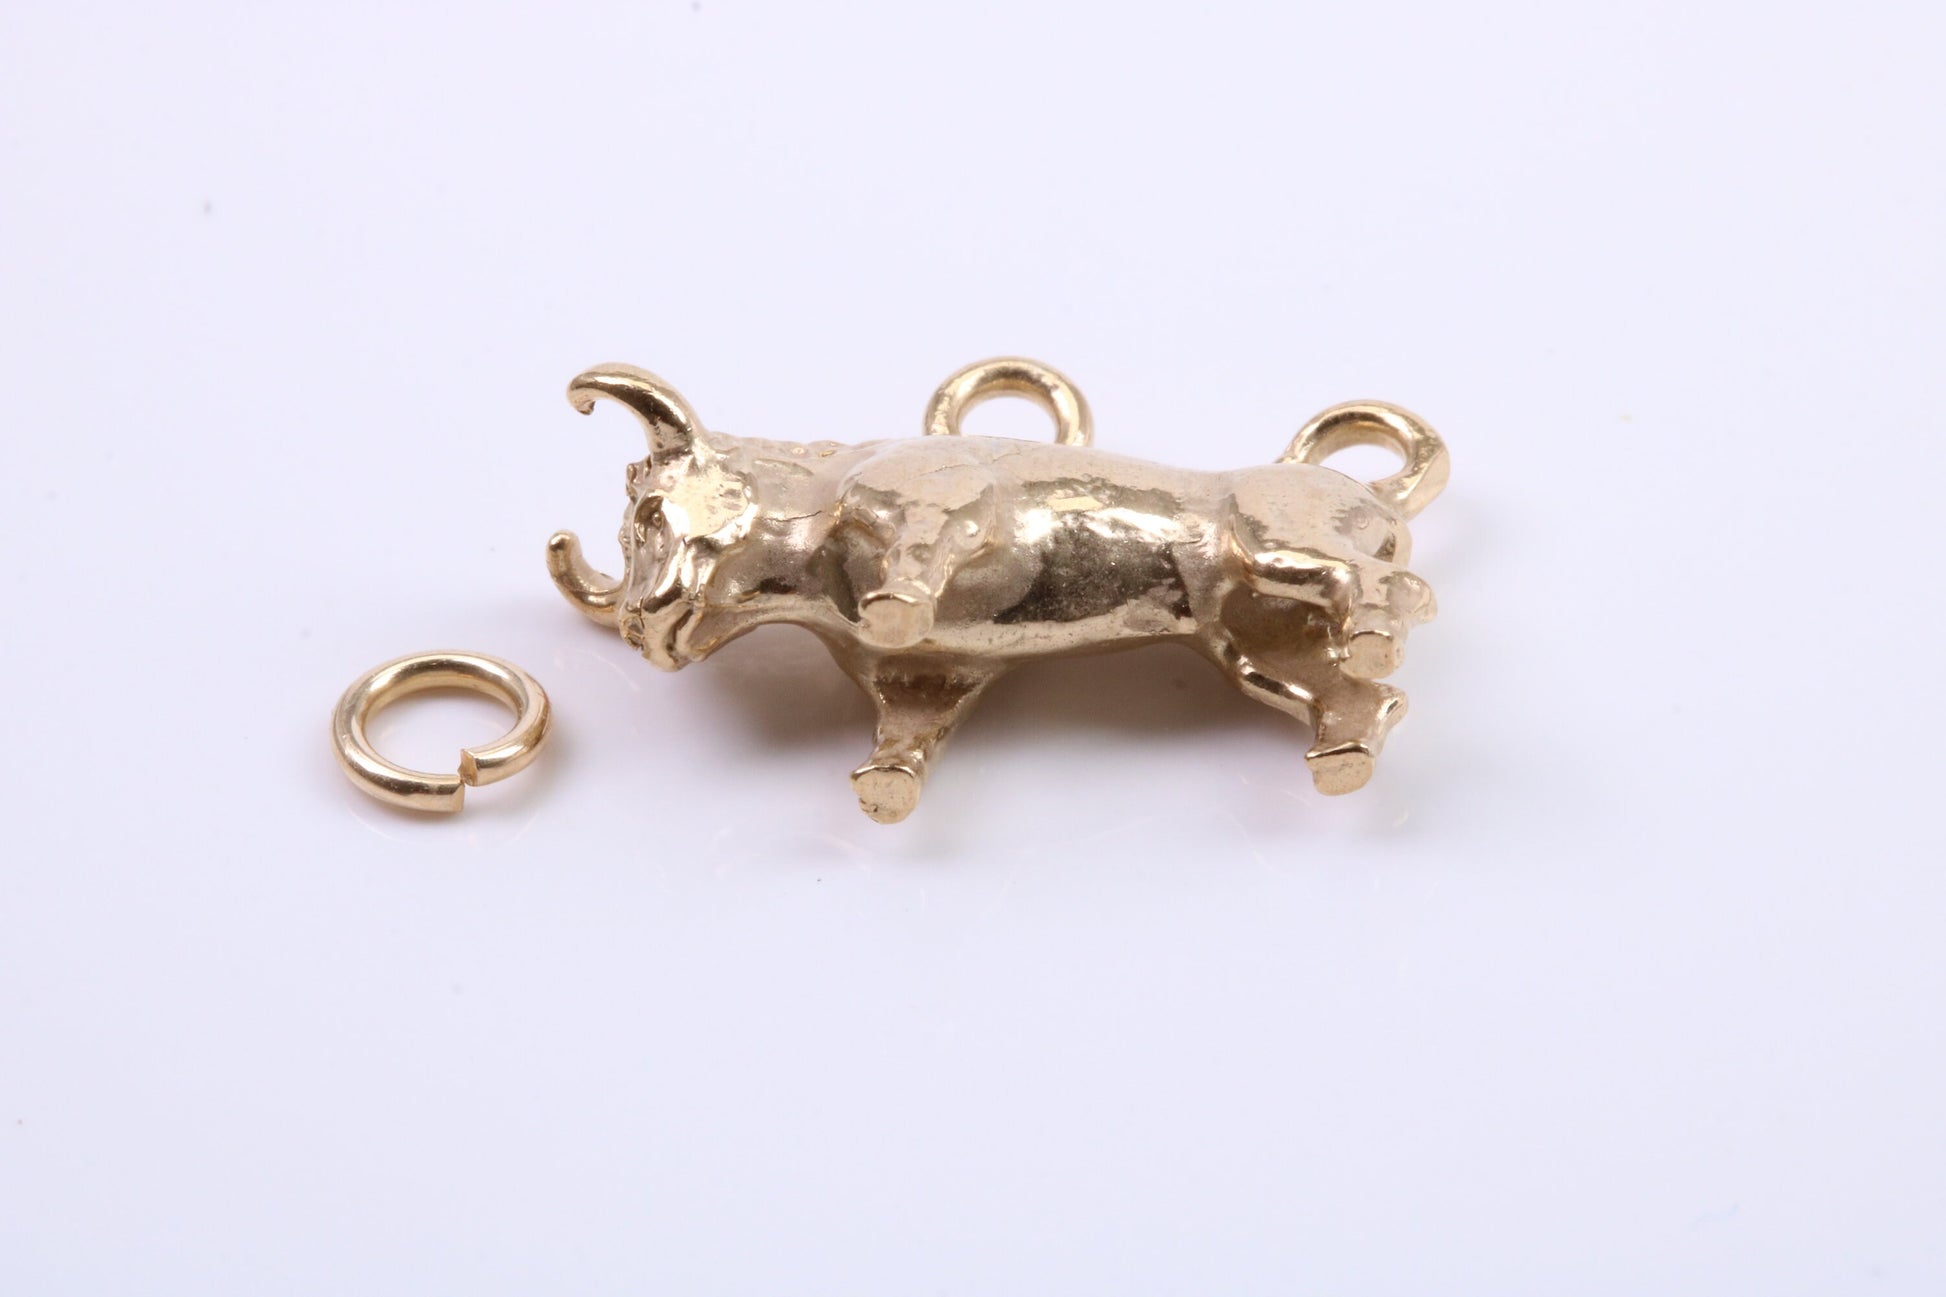 Taurus Zodiac Sign Charm, Traditional Charm, Made from Solid 9ct Yellow Gold, British Hallmarked, Complete with Attachment Link